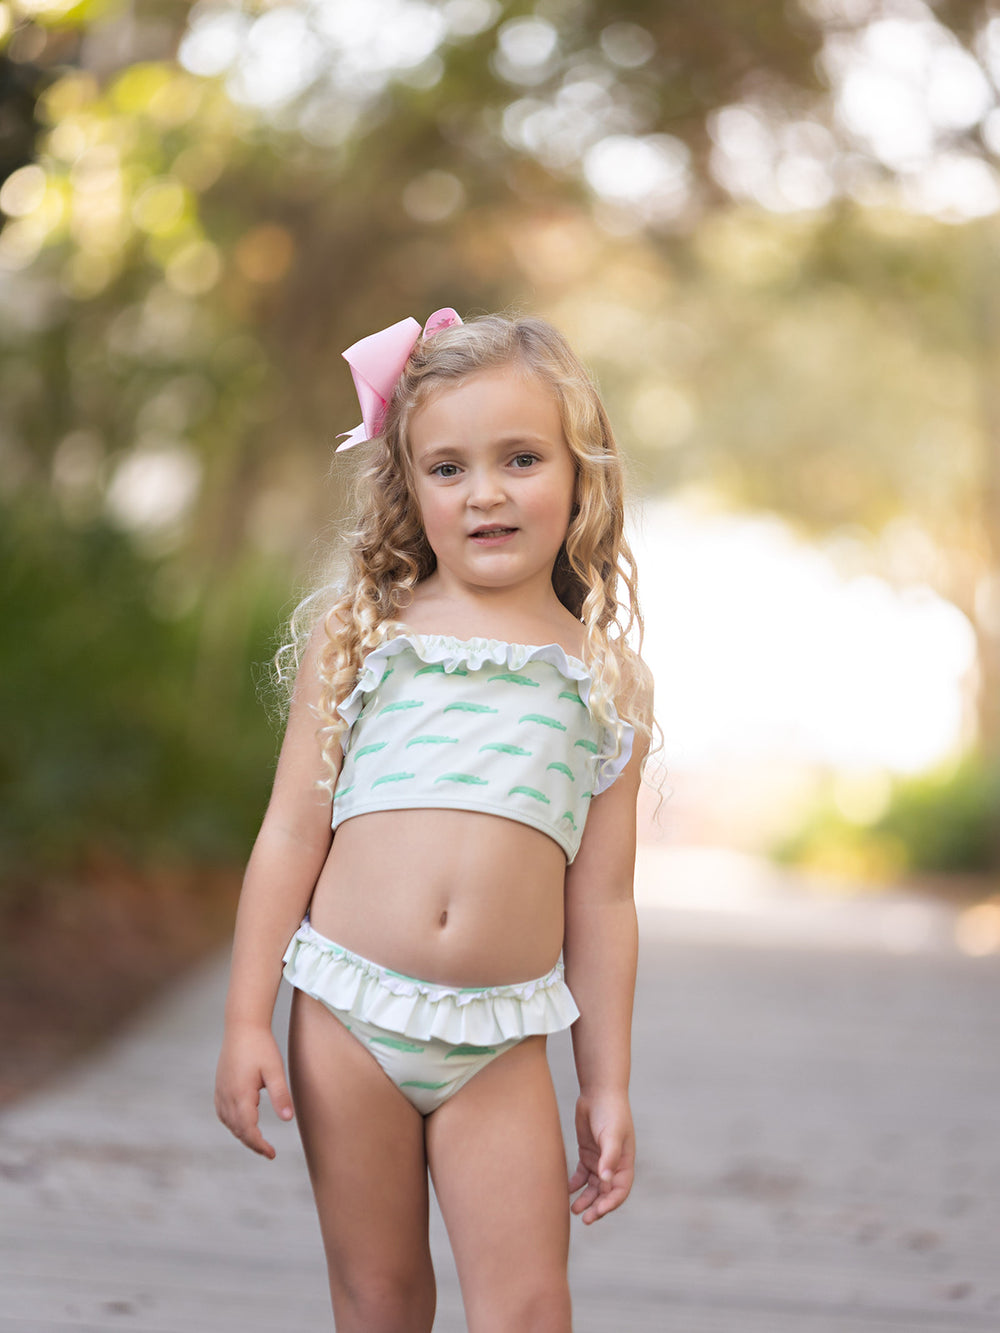 Hello Happiness Pink N' Blue Tween Two-Piece Swimsuit – The Oaks Apparel Co.